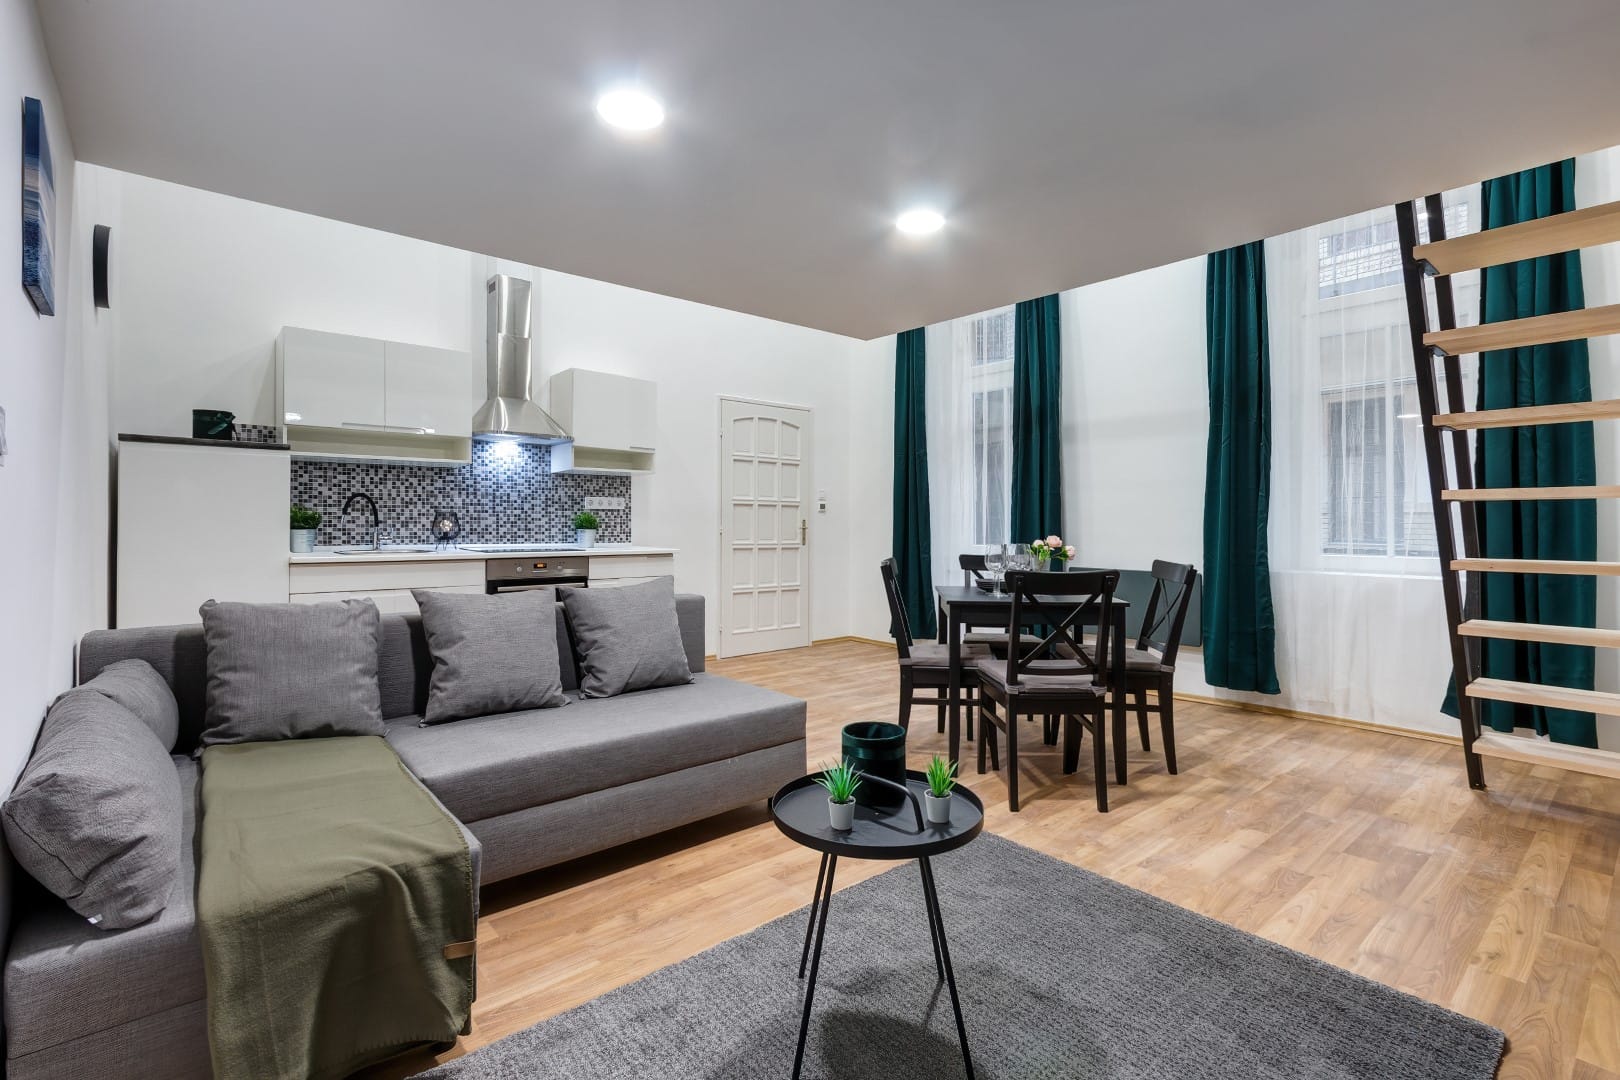 budapest-apartment-for-sale-cheap-budget-flat-downtown-real-estate-property-for-sale-small-studio-renewed-renovated-apartment-for1